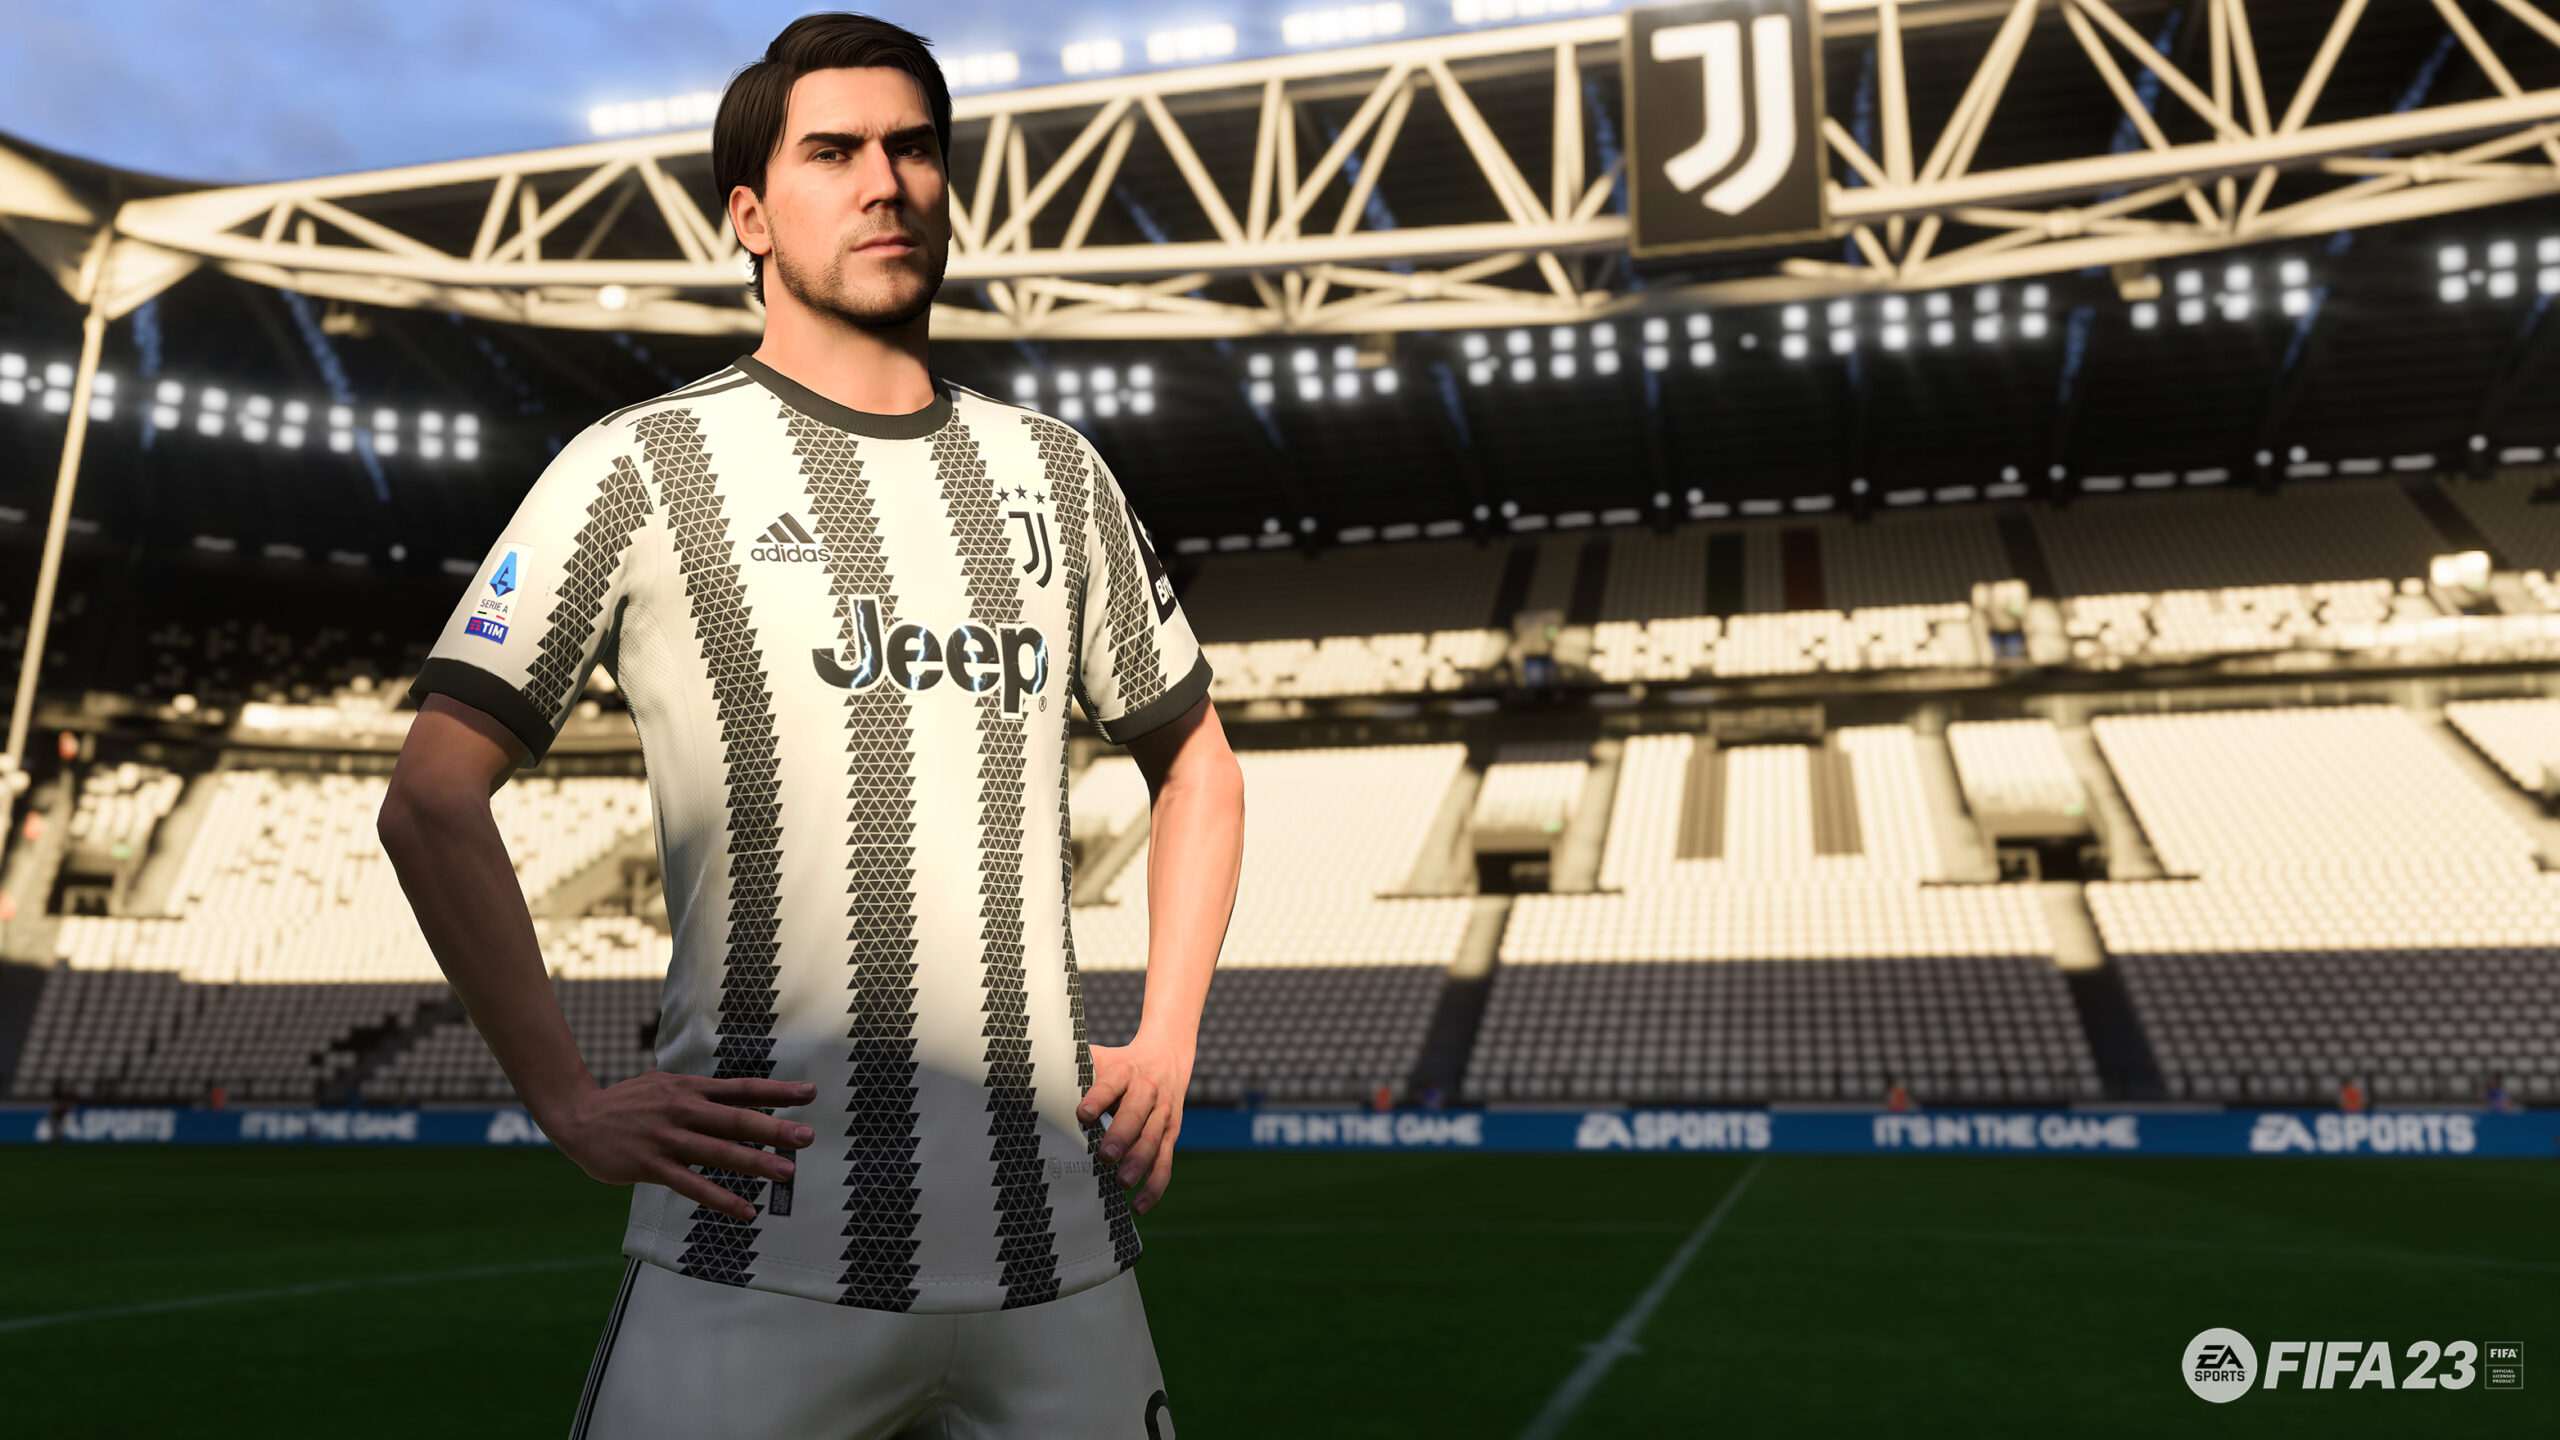 FIFA 23 Gets Gameplay Deep Dive, Showing HyperMotion 2